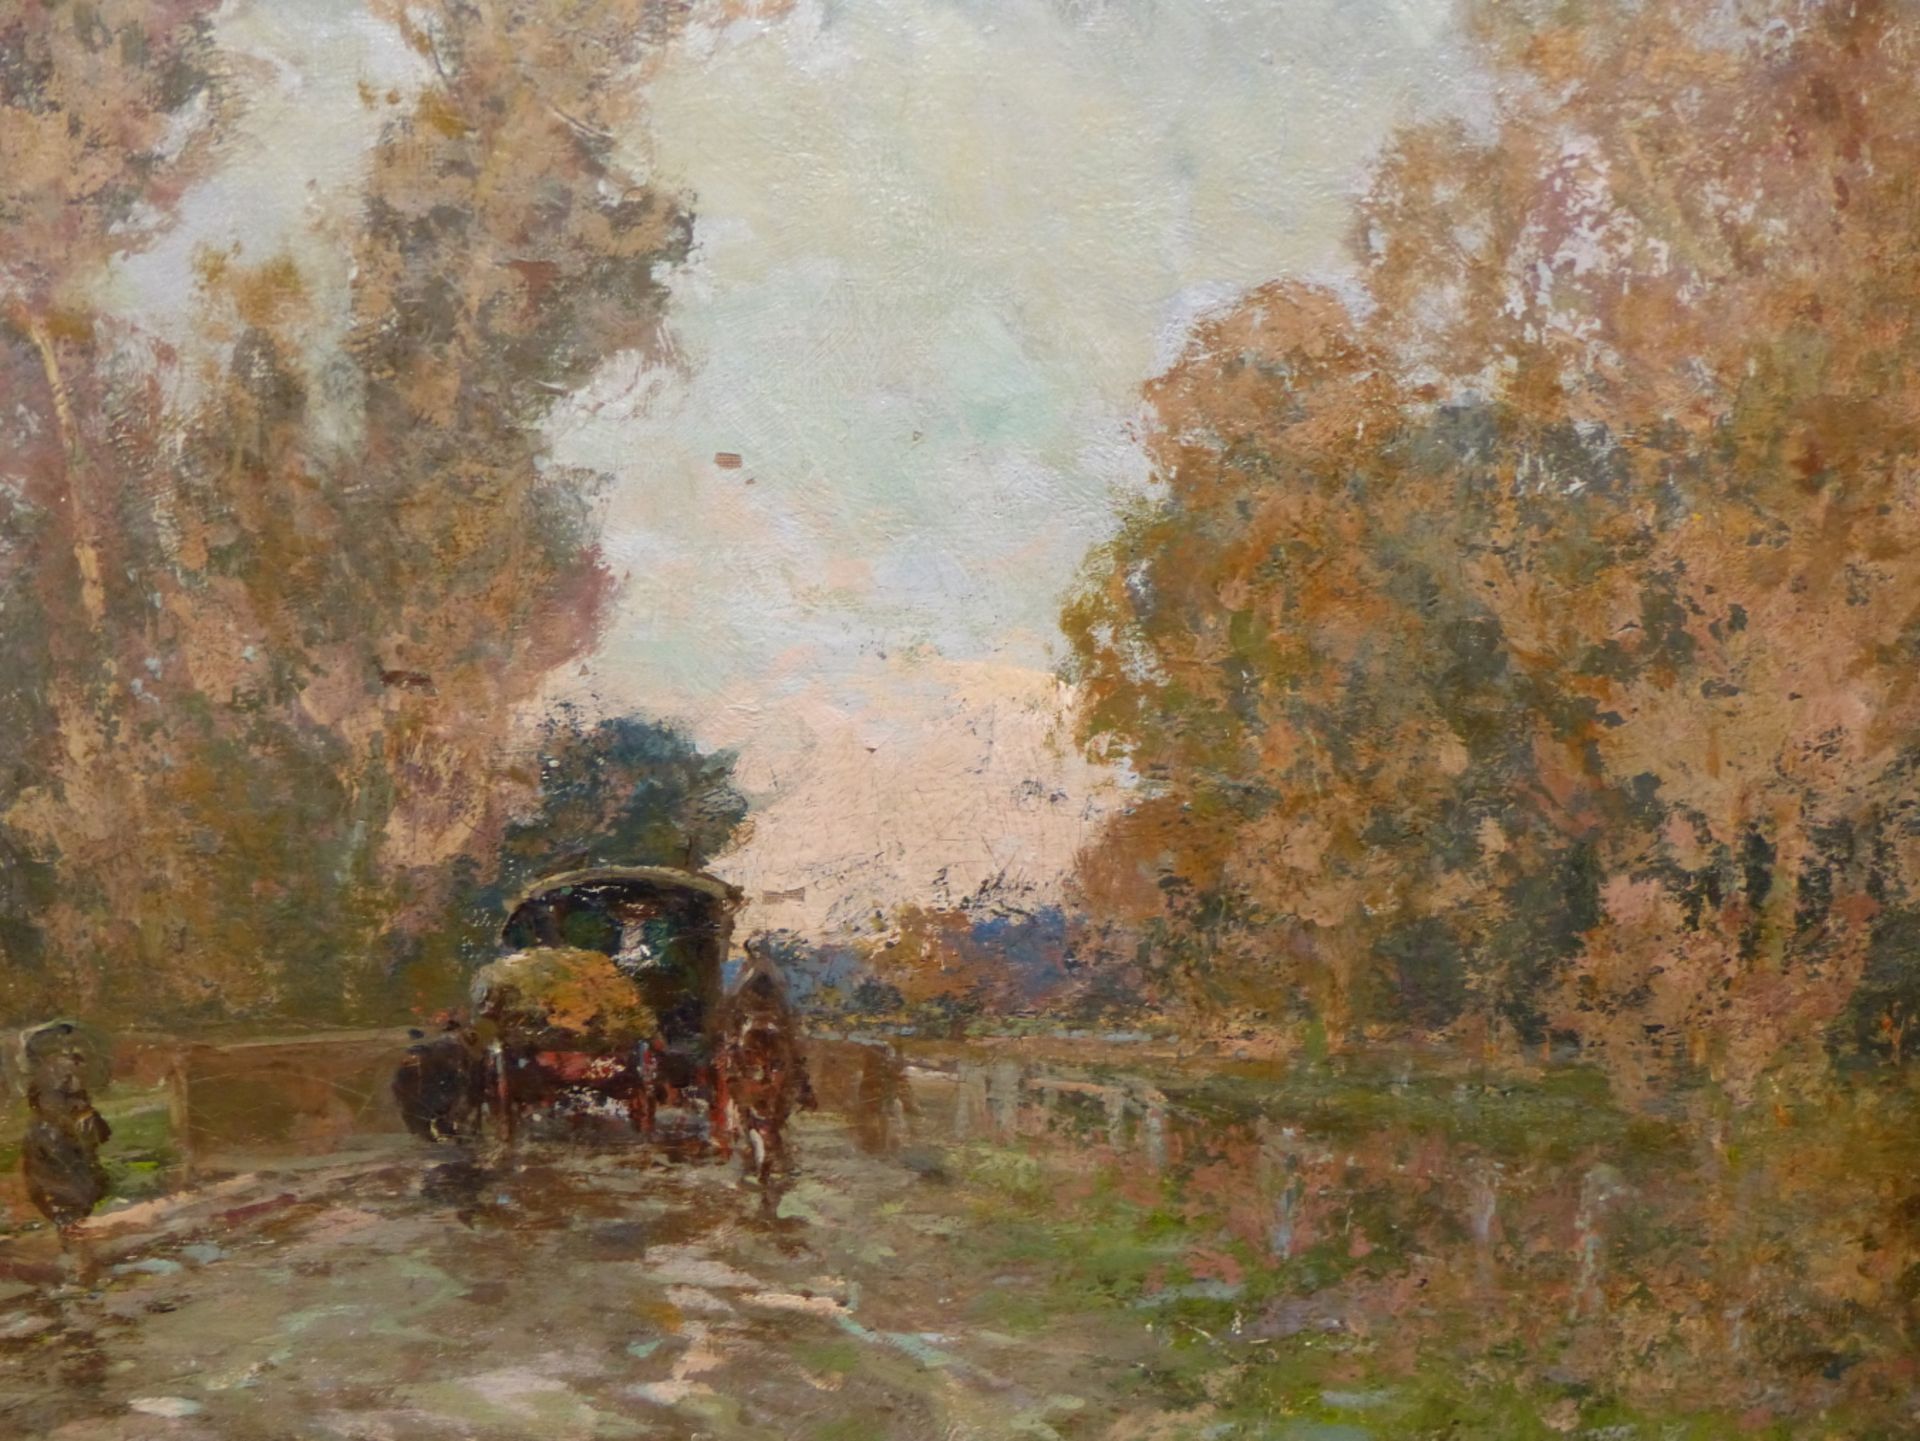 IMPRESSIONIST SCHOOL (LATE 19TH CENTURY), HORSE DRAWN CARRIAGE AND FIGURES ON A TREE LINED ROAD,